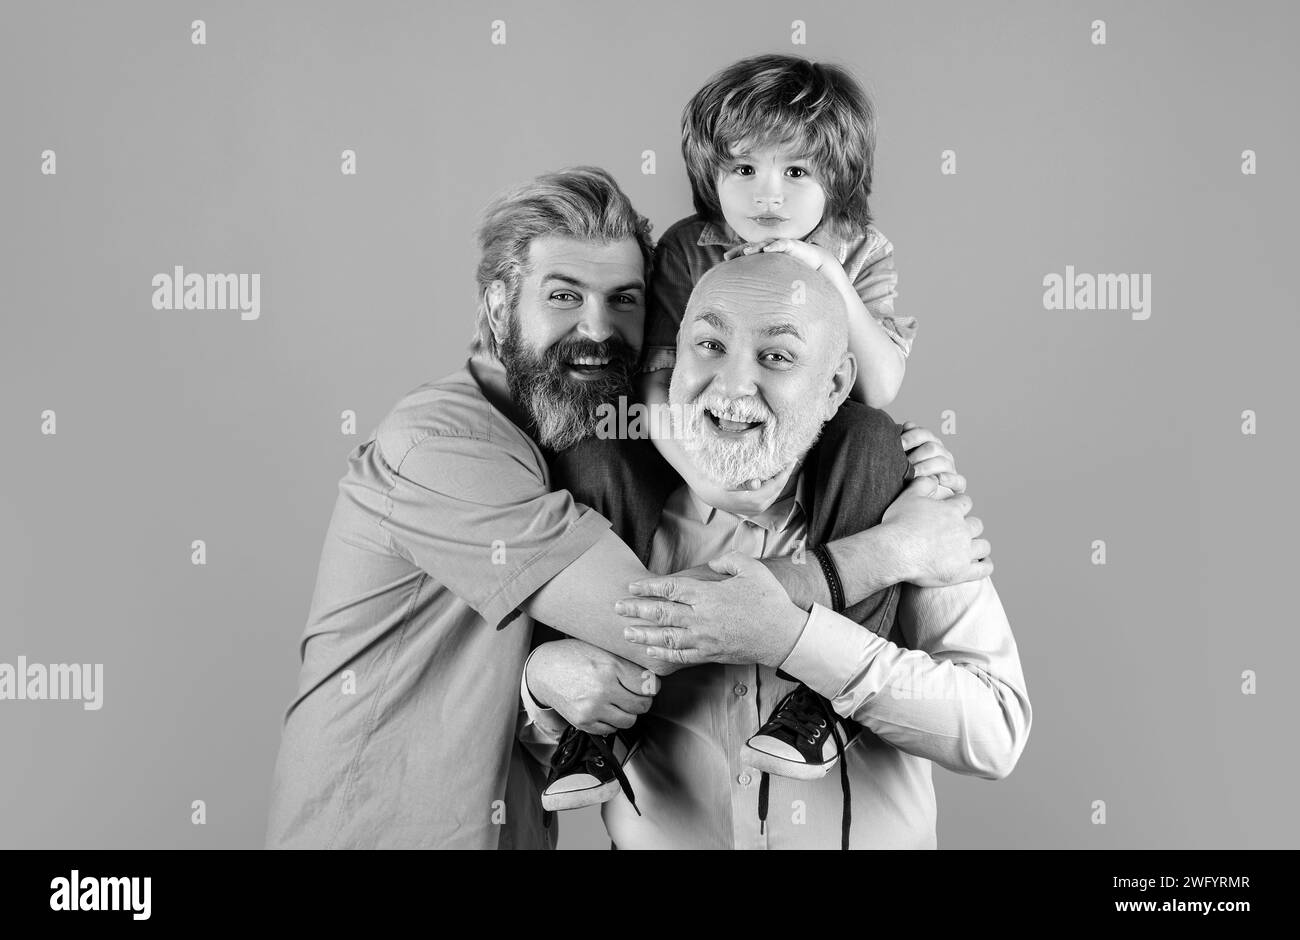 Grandfather father and son hugging and embracing isolated. Fathers day concept. Men in different ages cuddling bonding. Family tenderness hug, child l Stock Photo